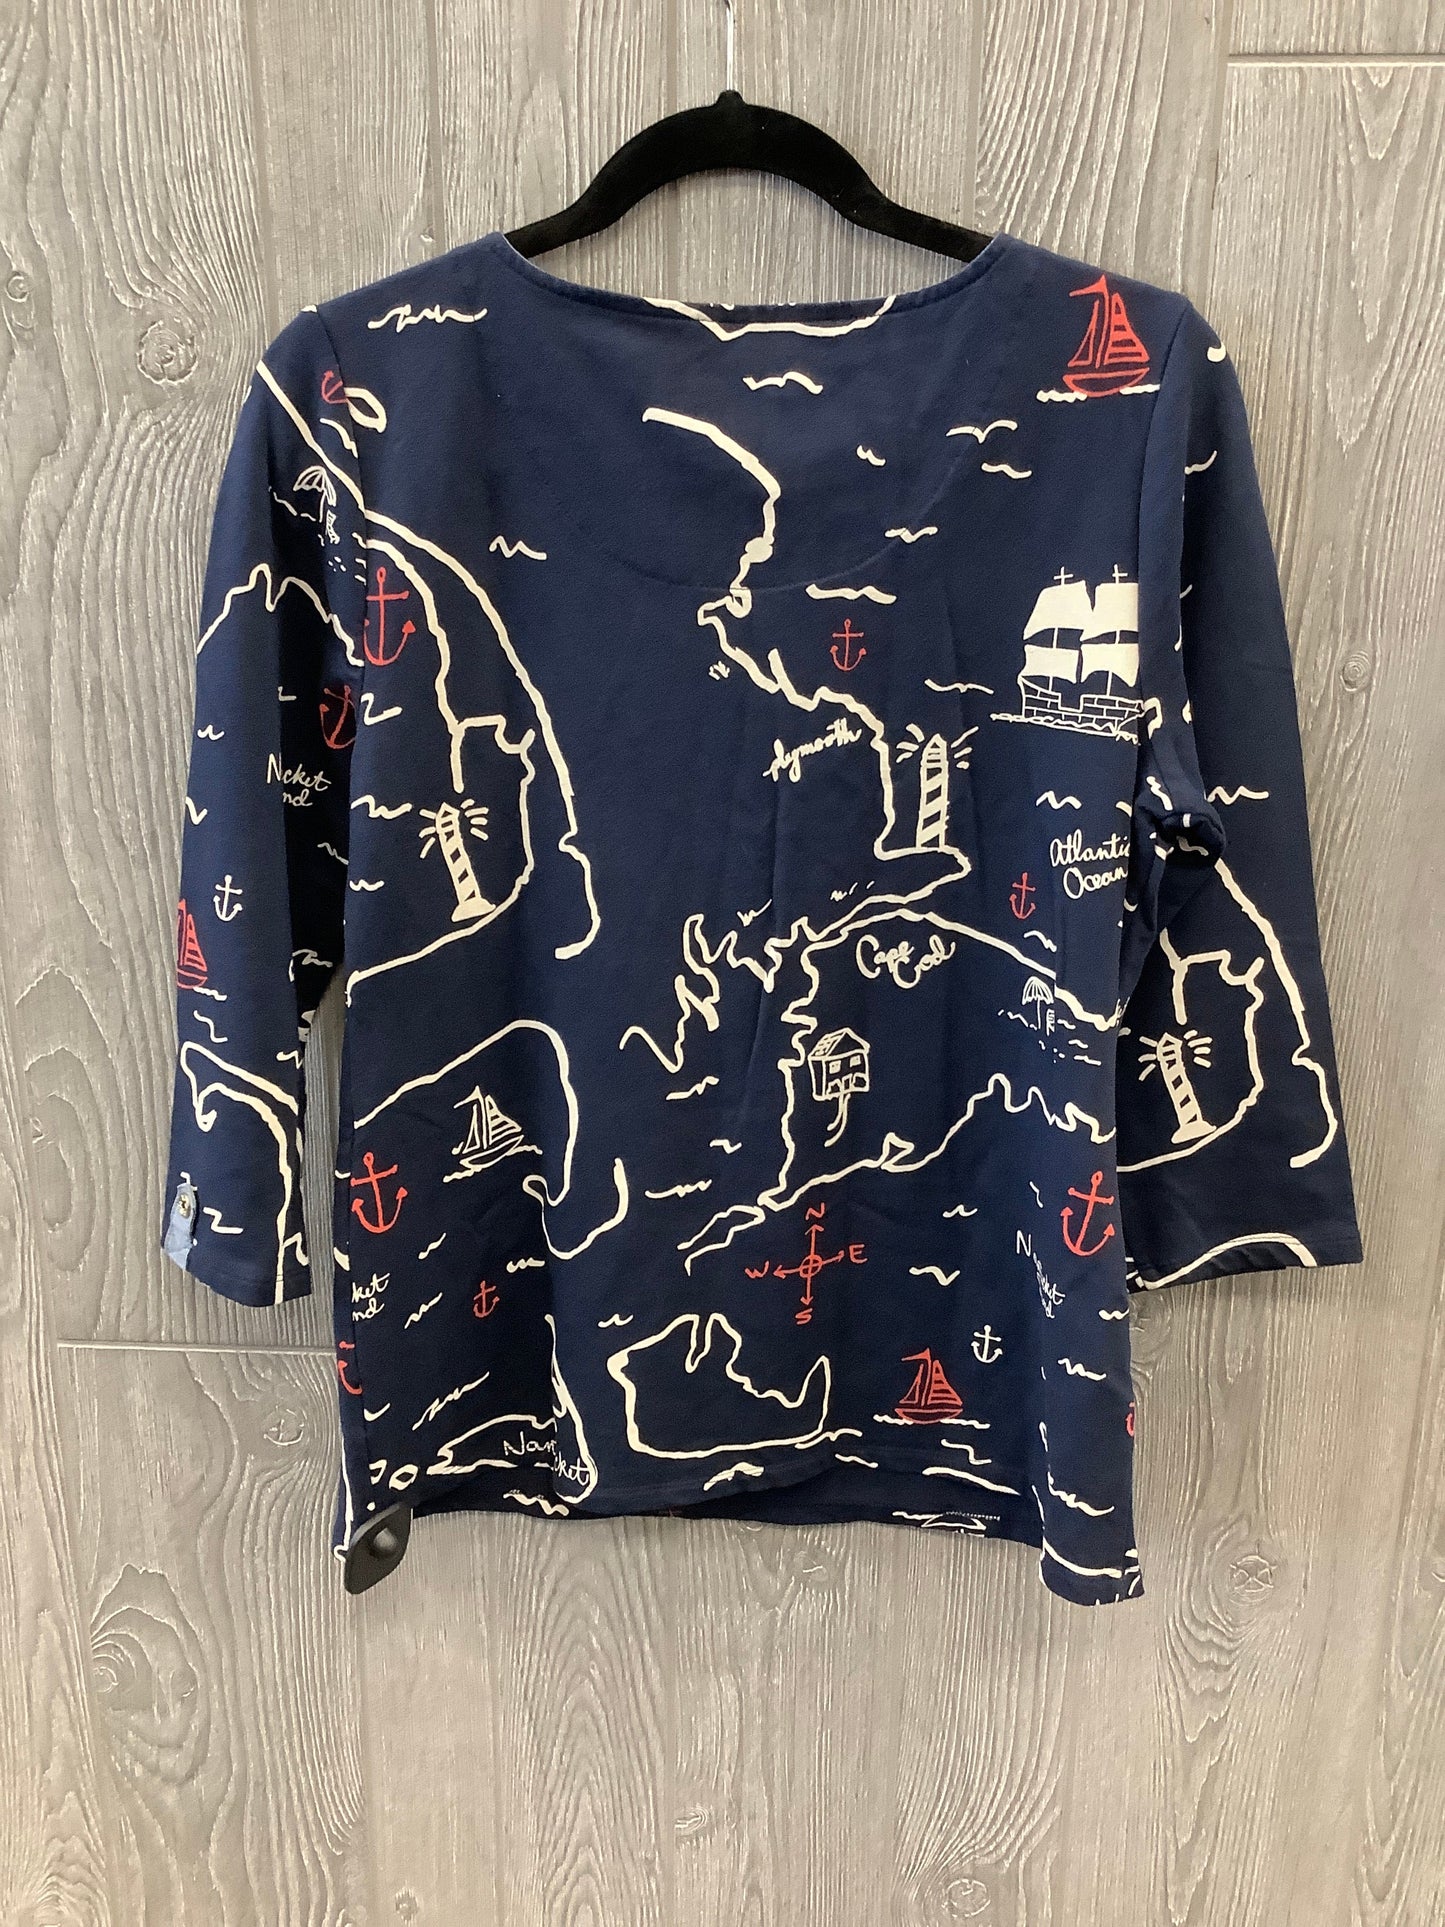 Navy Top Long Sleeve Charter Club, Size M